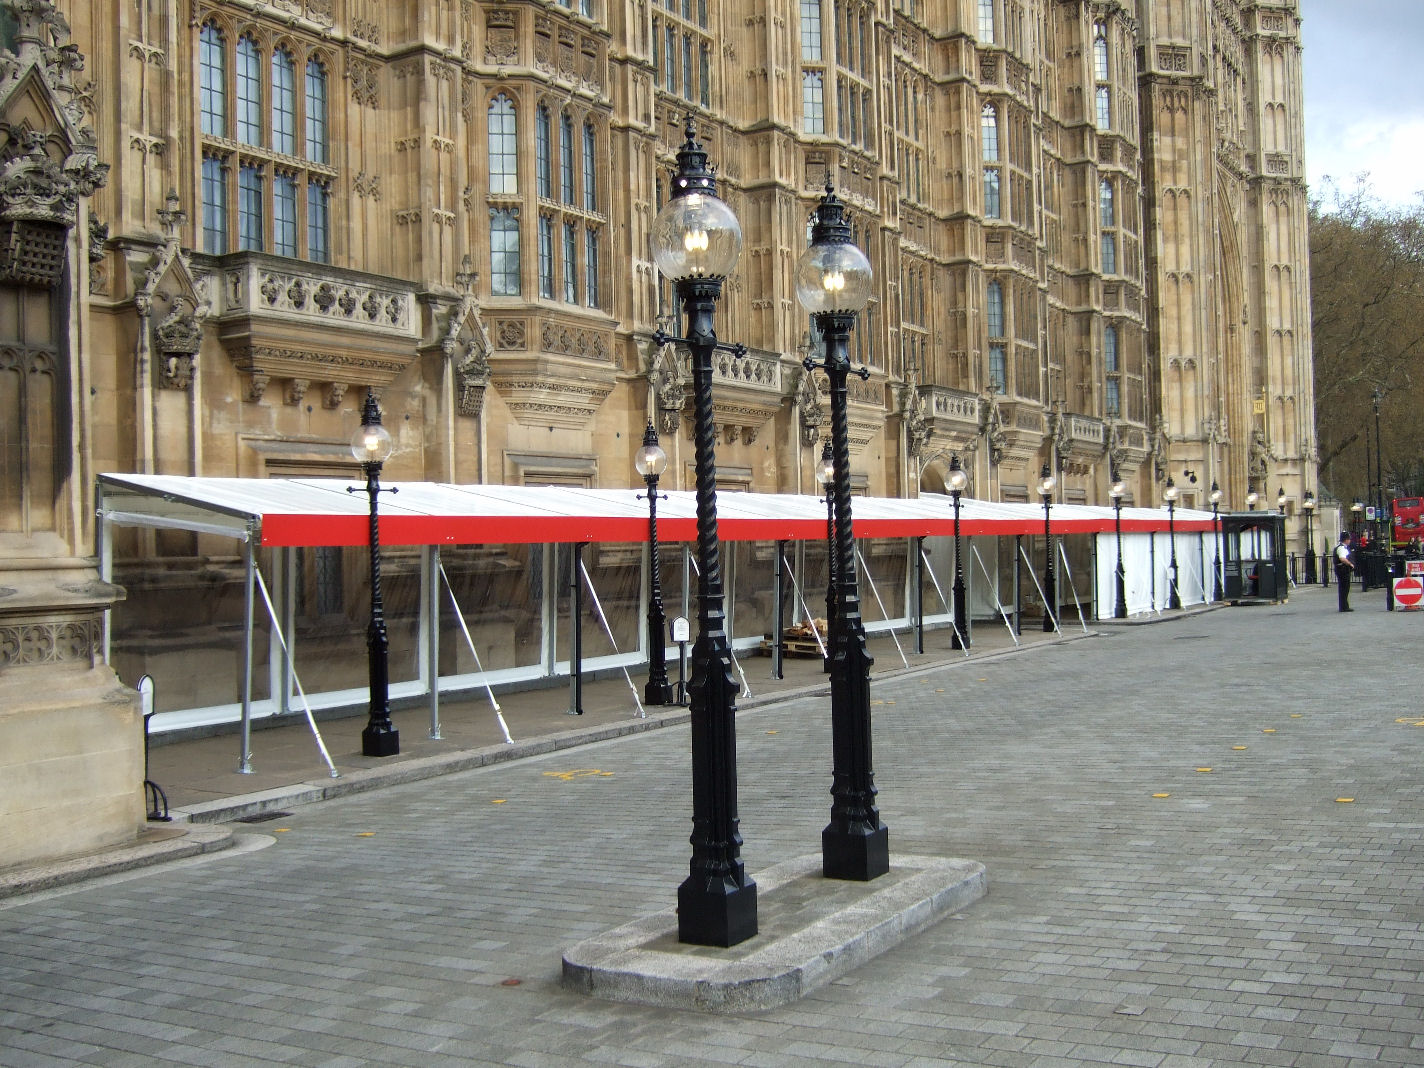 House of Parliament awning